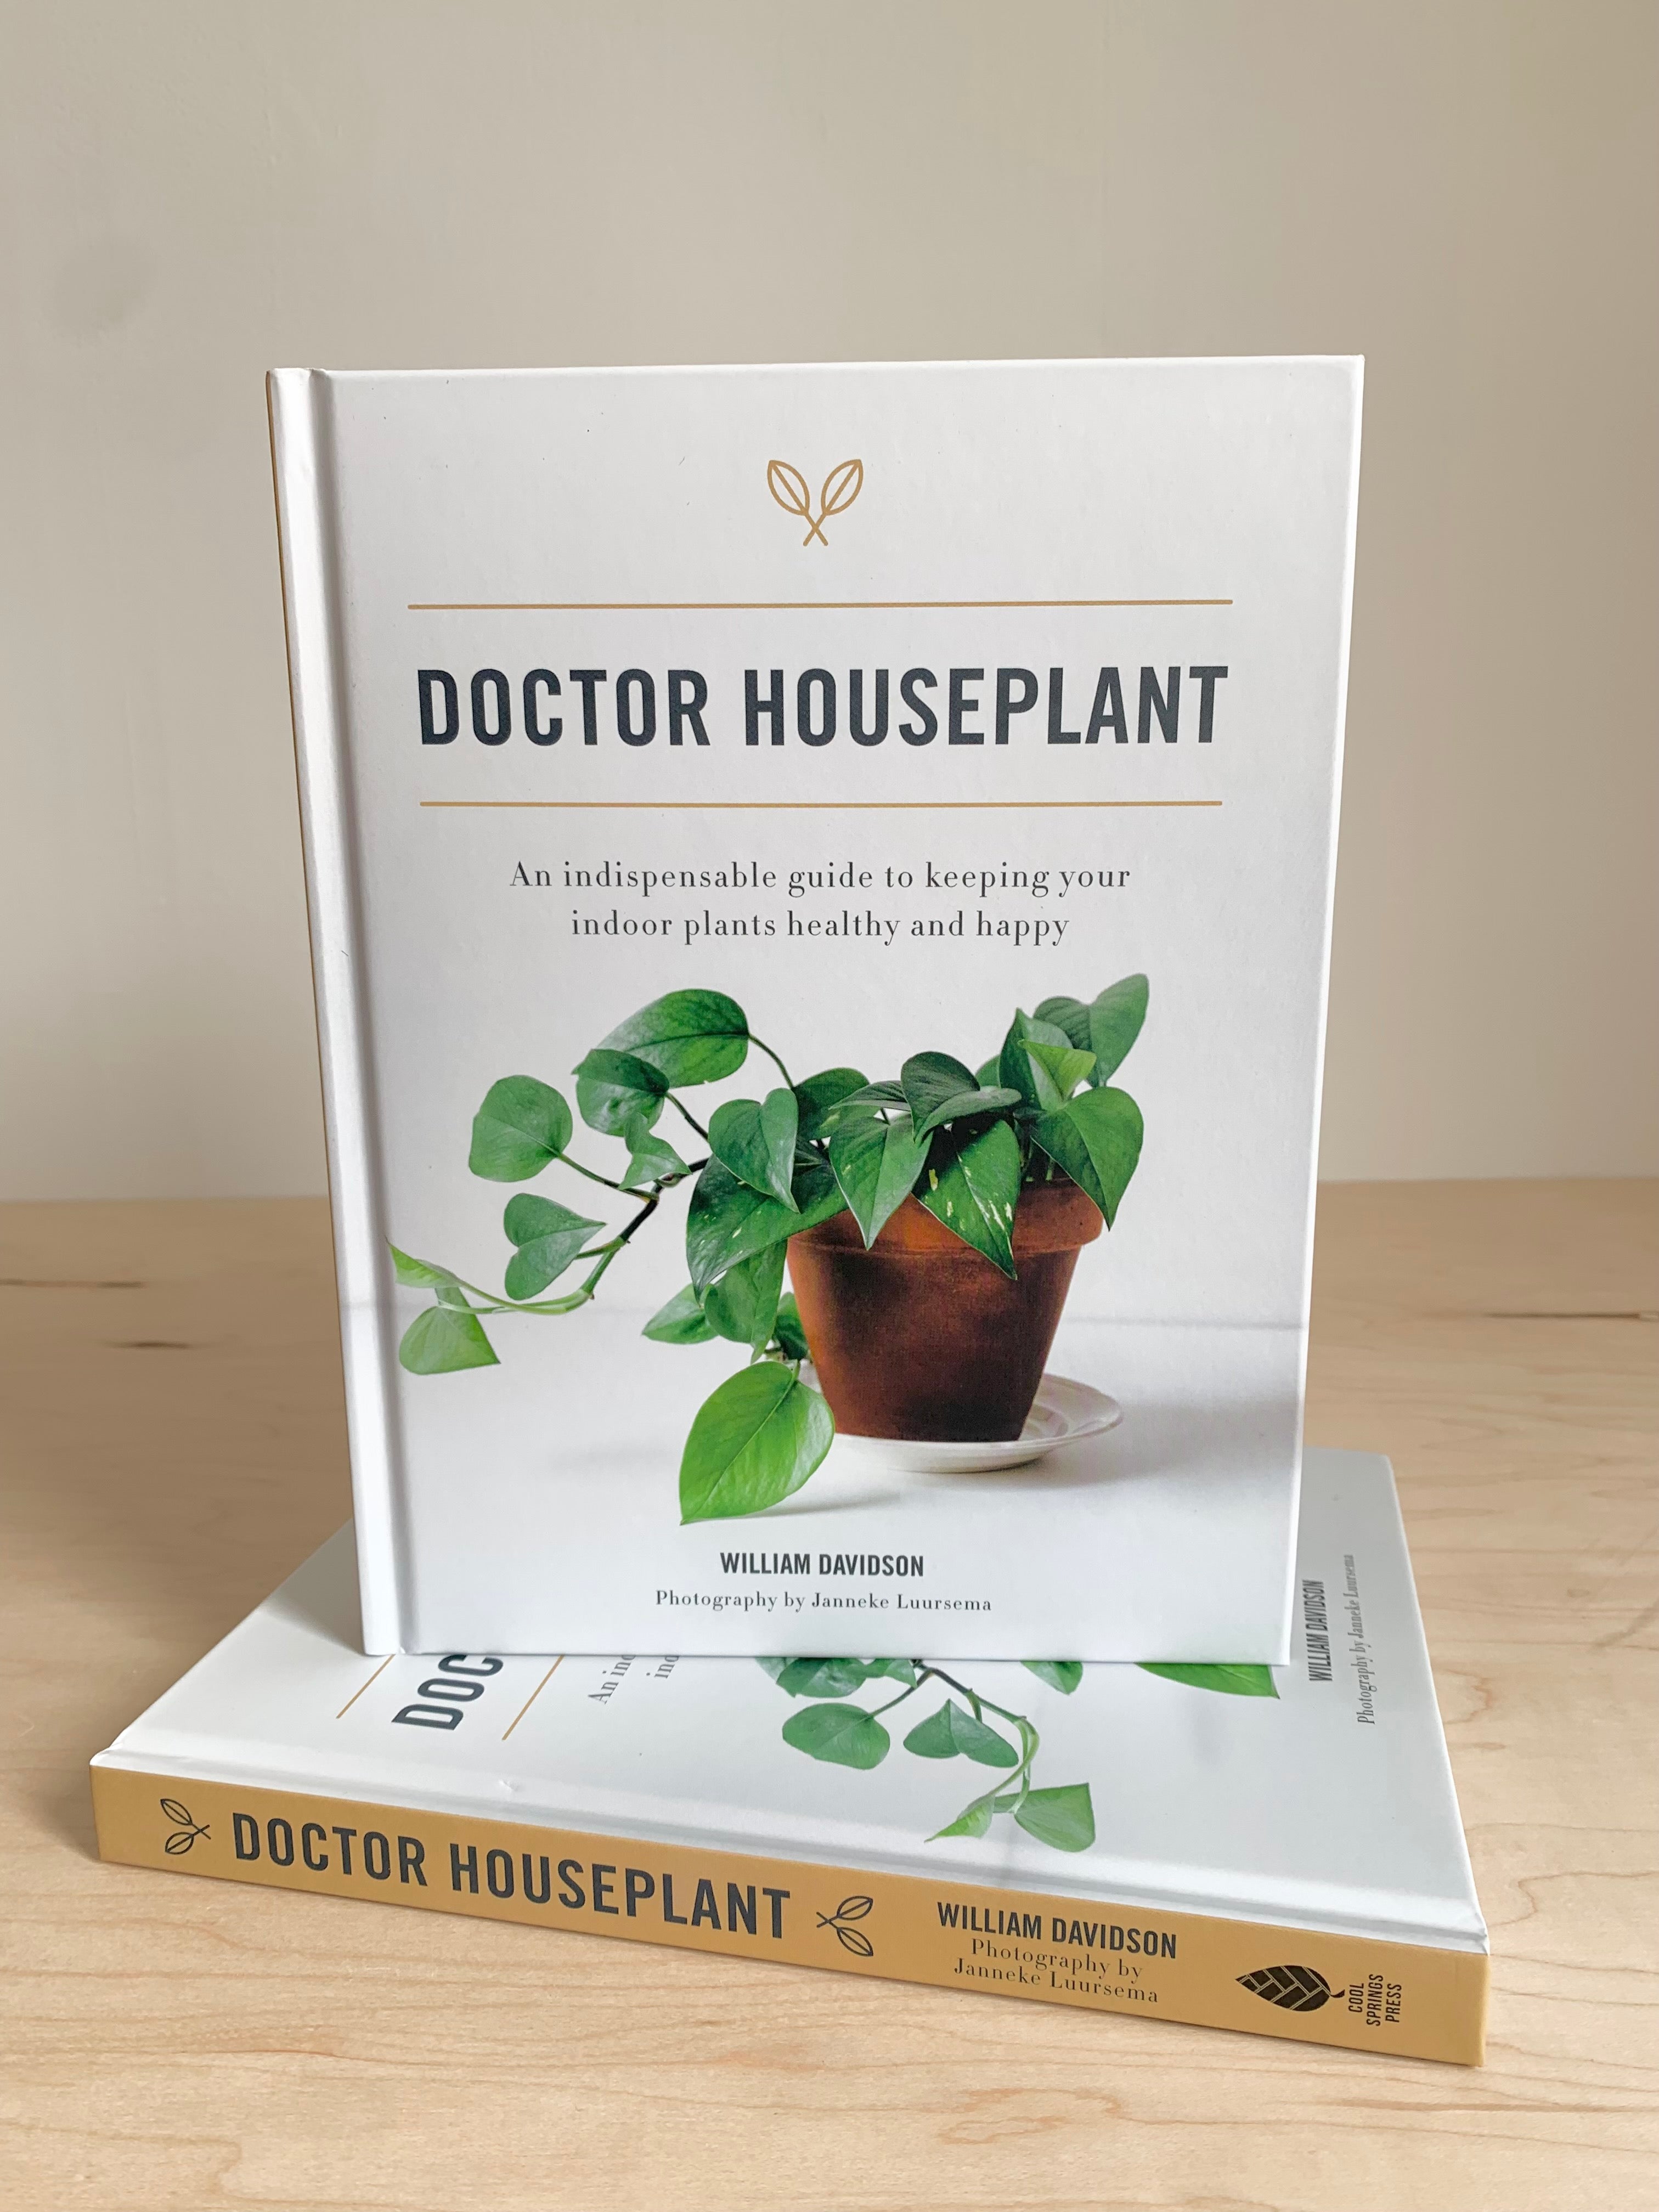 Doctor Houseplant: An Indispensible Guide to Keeping Your Houseplants Happy and Healthy